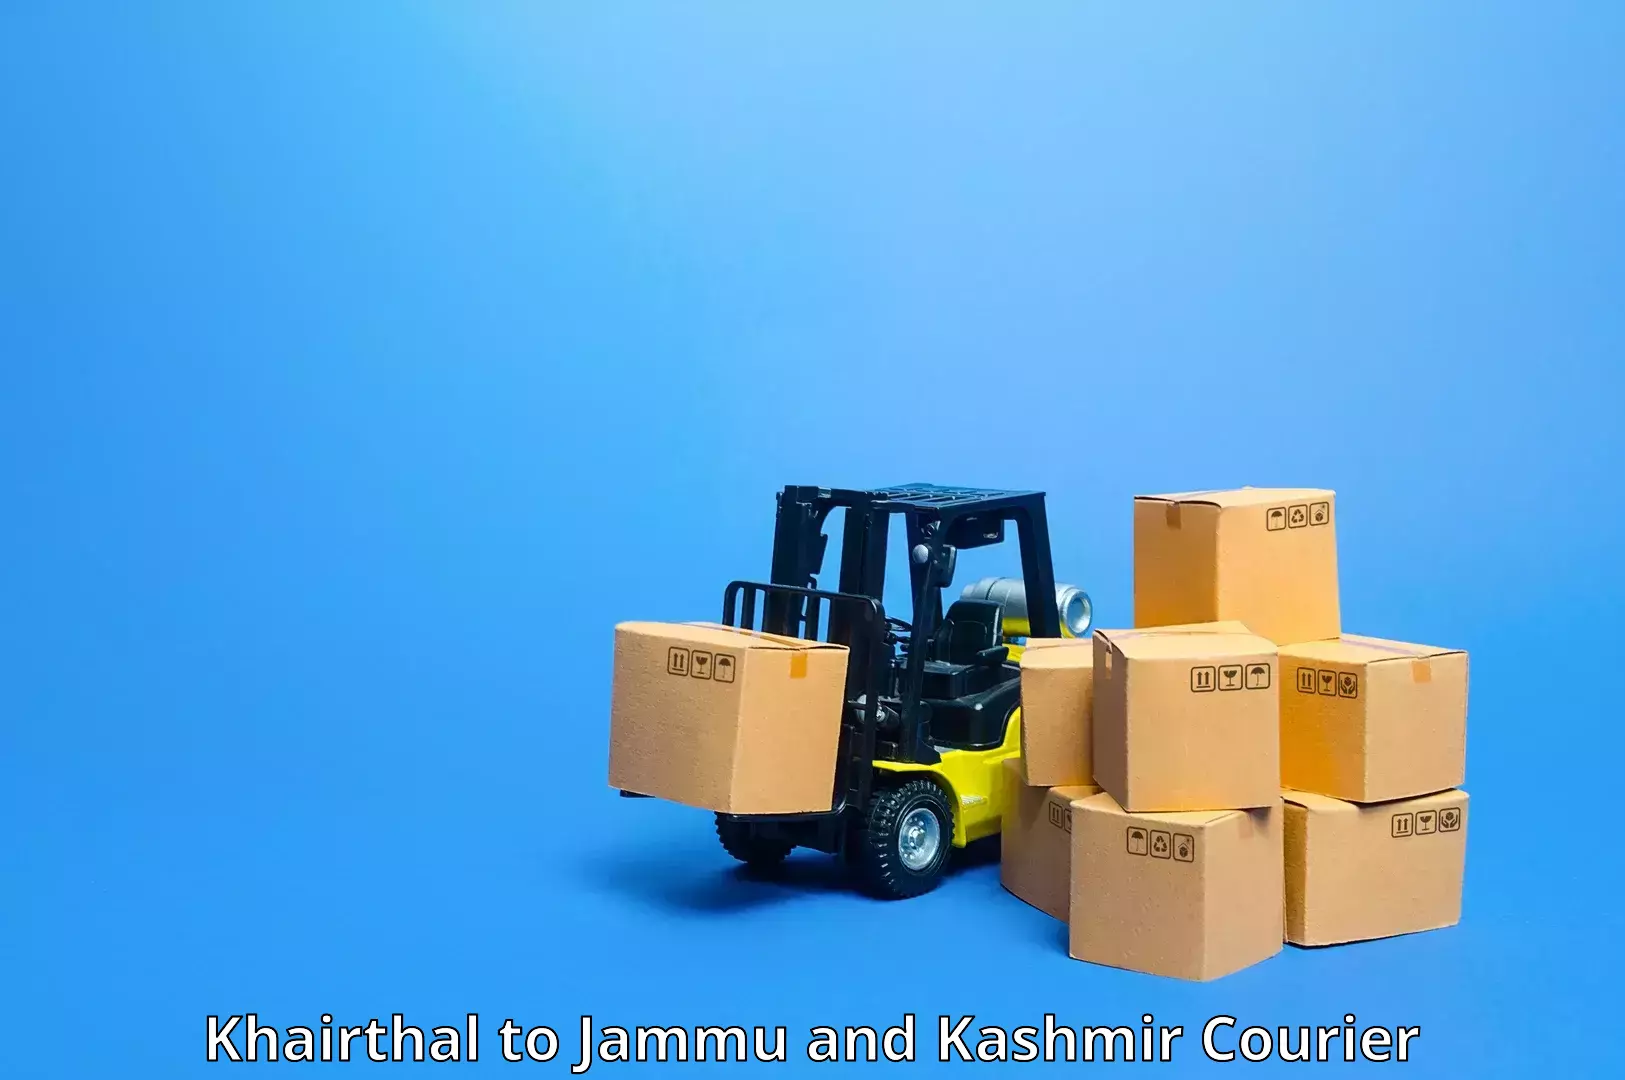 Cargo delivery service Khairthal to Budgam